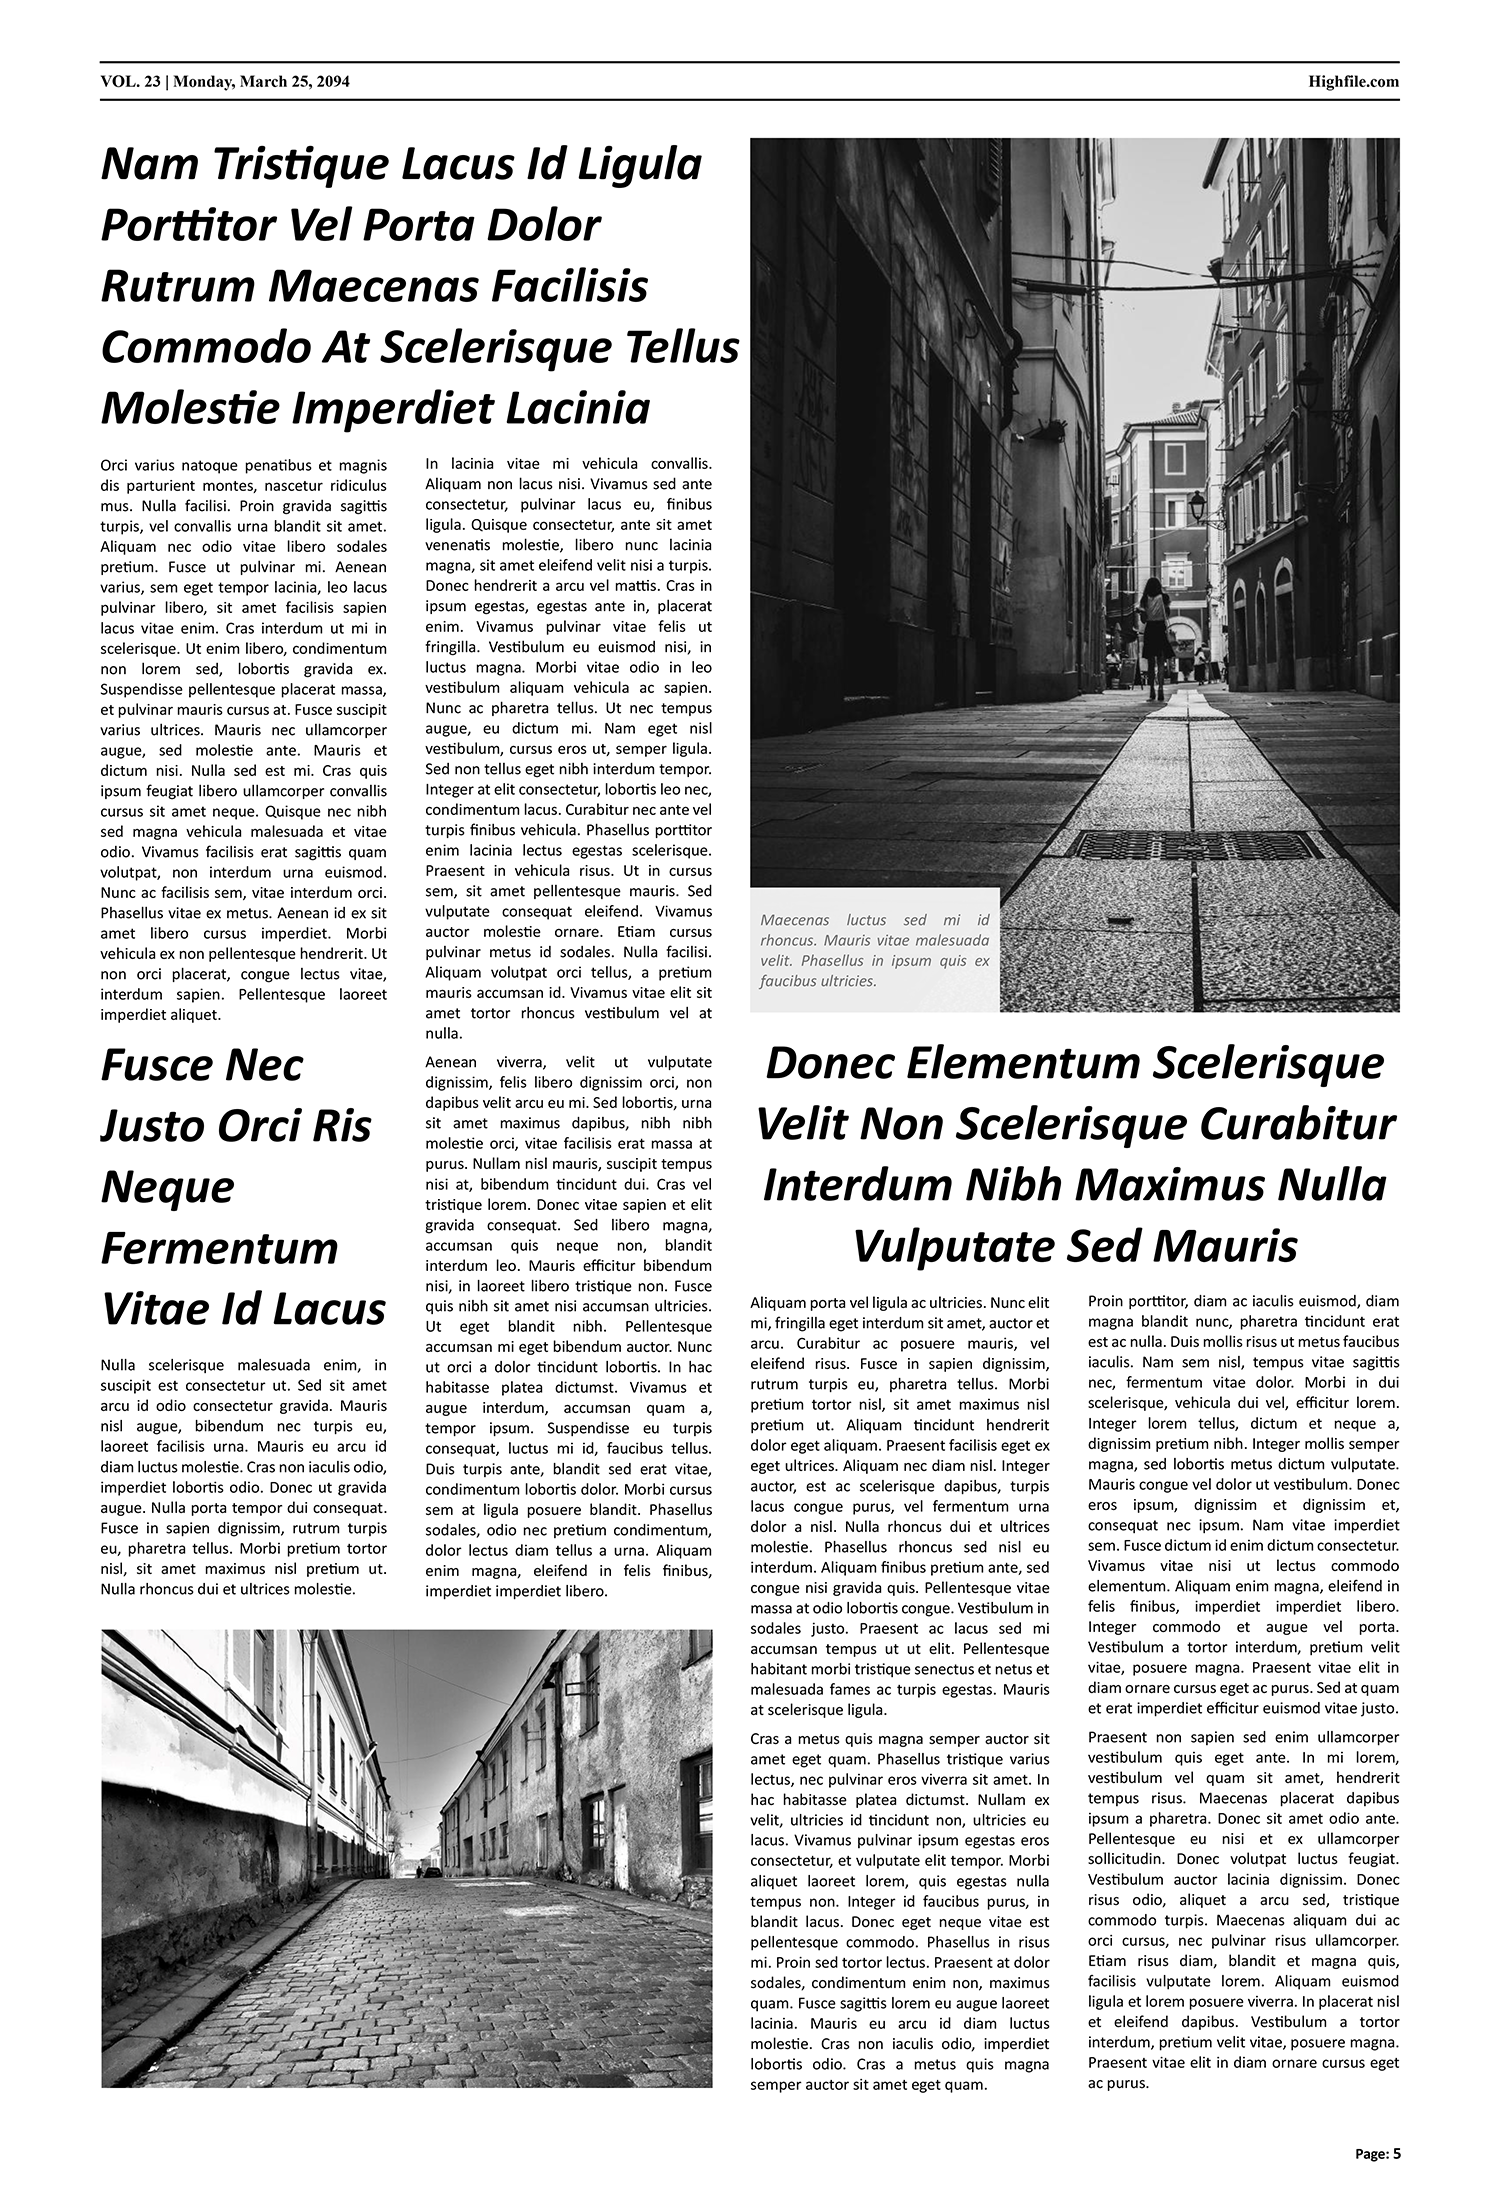 Blank Newspaper Template - Page 05